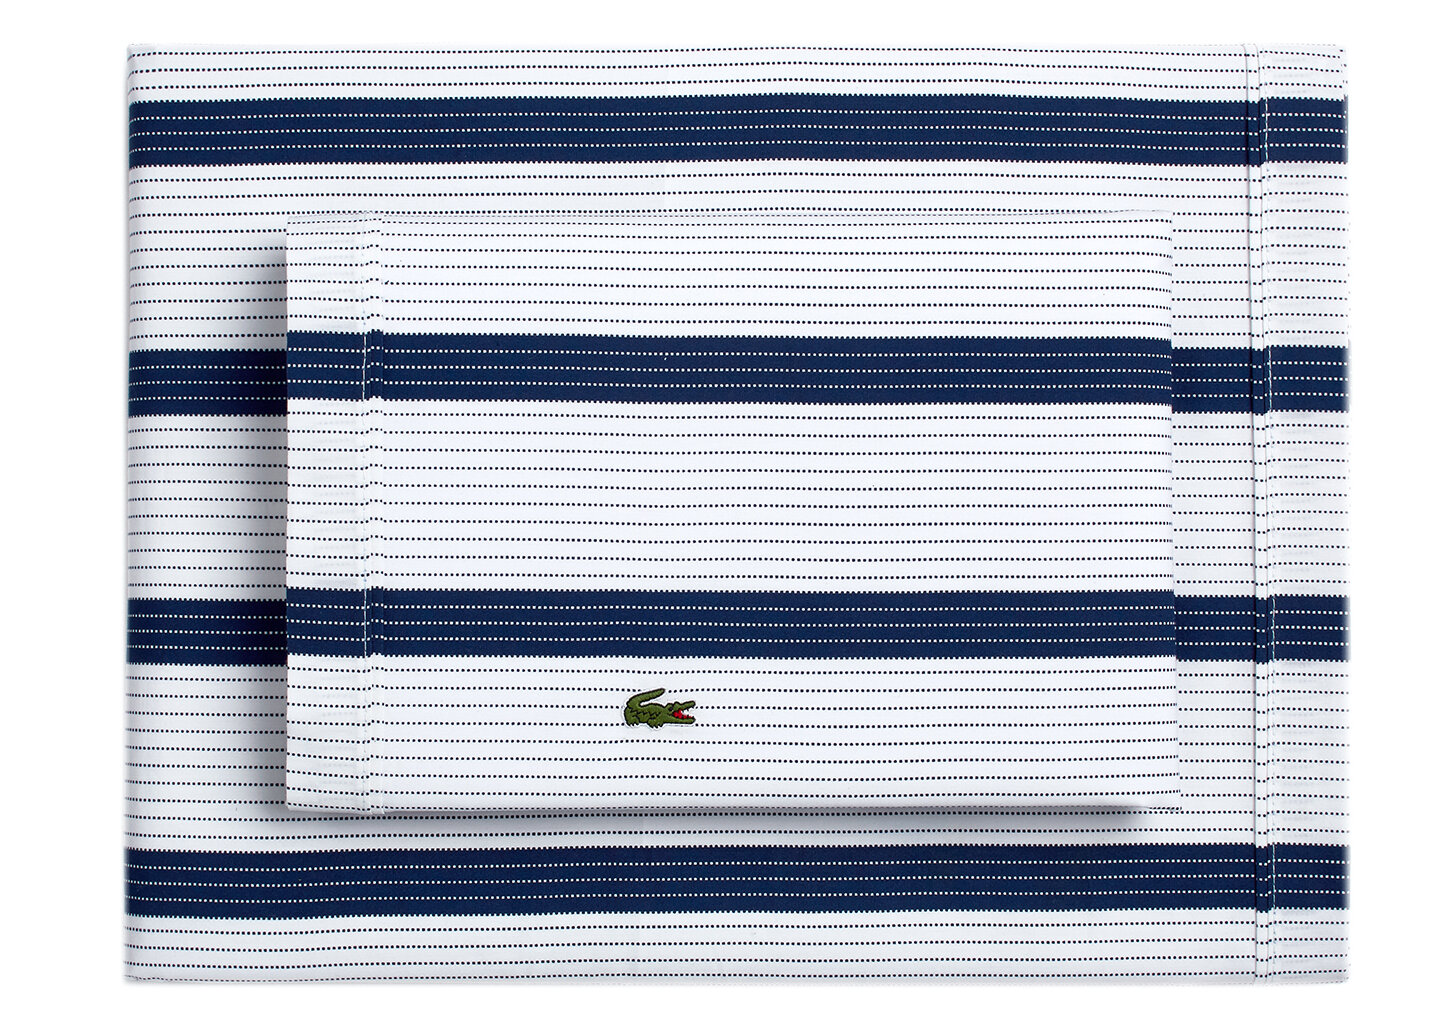 lacoste printed cotton percale queen sheet set